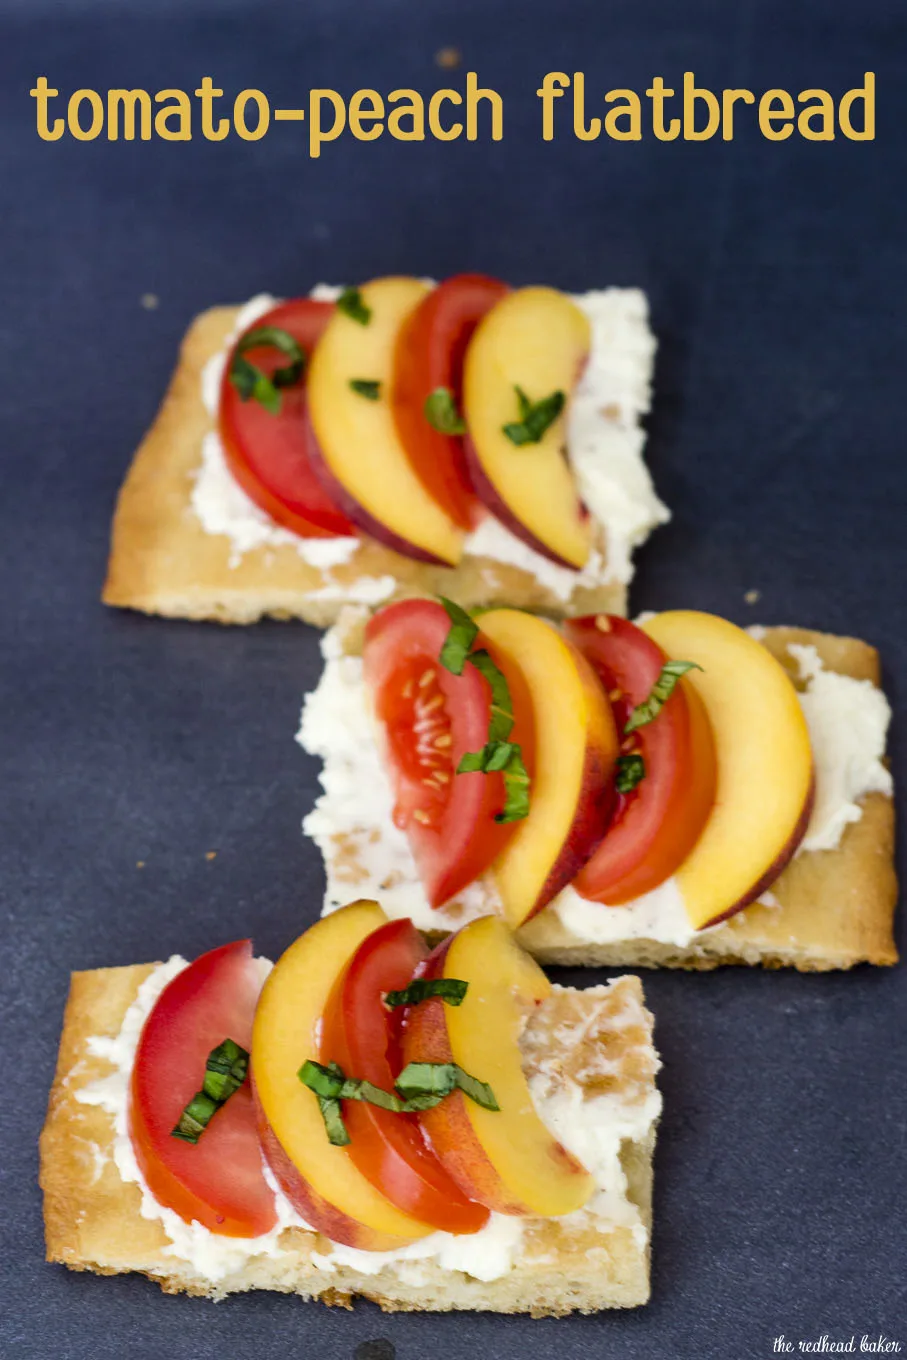 Tomato-peach flatbread is the perfect summer appetizer. You can't beat fresh summer tomatoes and peaches, plus no cooking required! #CLBlogger Recipe at TheRedheadBaker.com